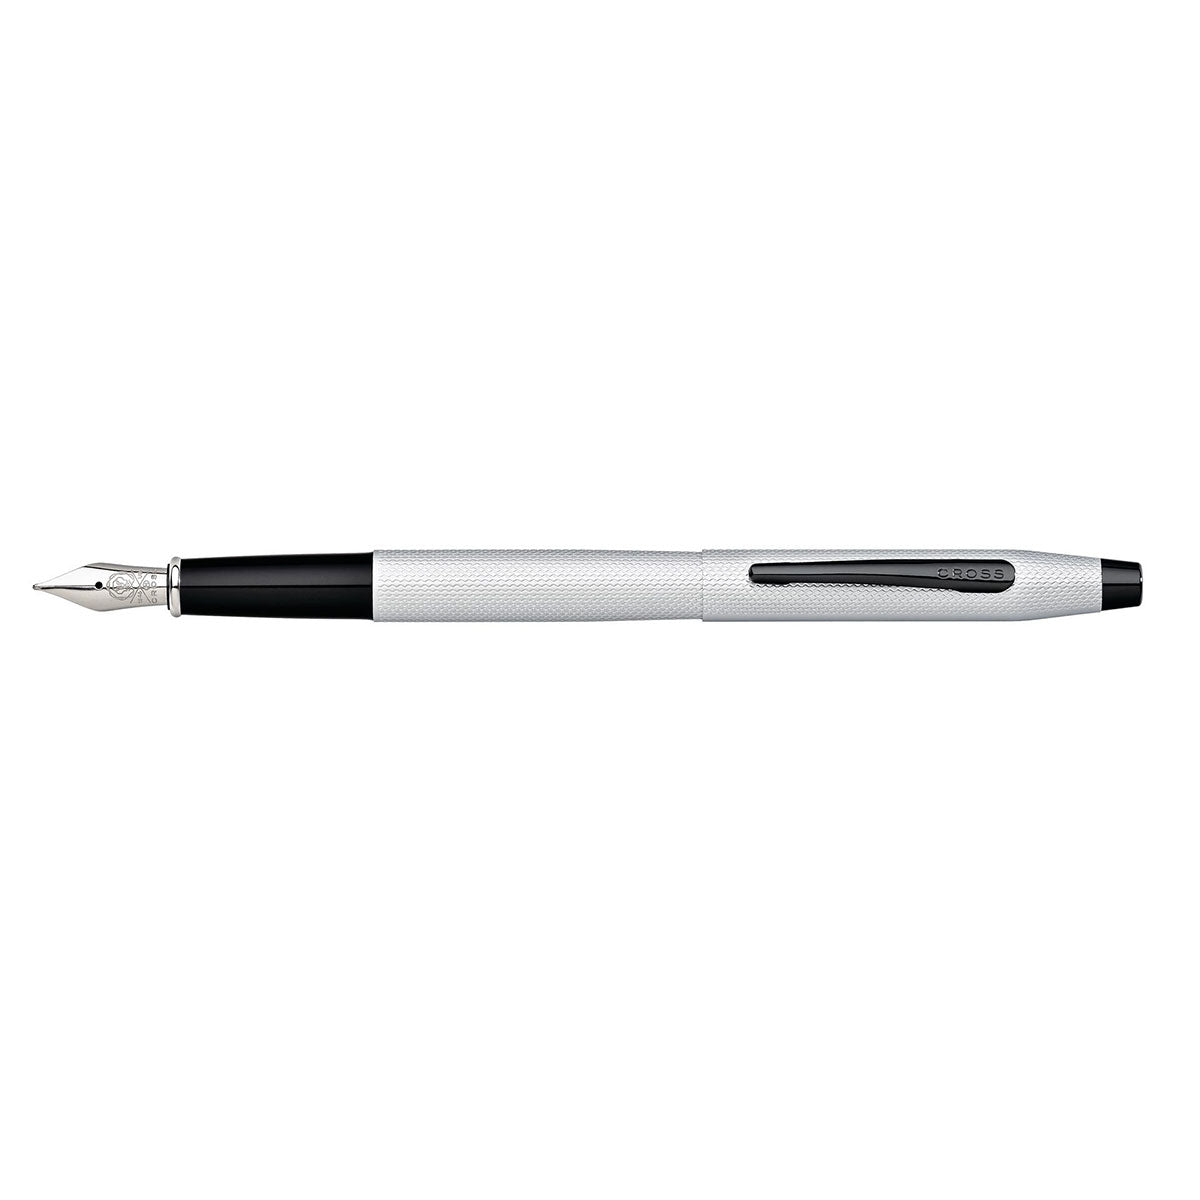 Pre Owned Cross Classic Century Brushed Chrome Fountain Pen Medium AT0086-124MS  Cross Fountain Pens